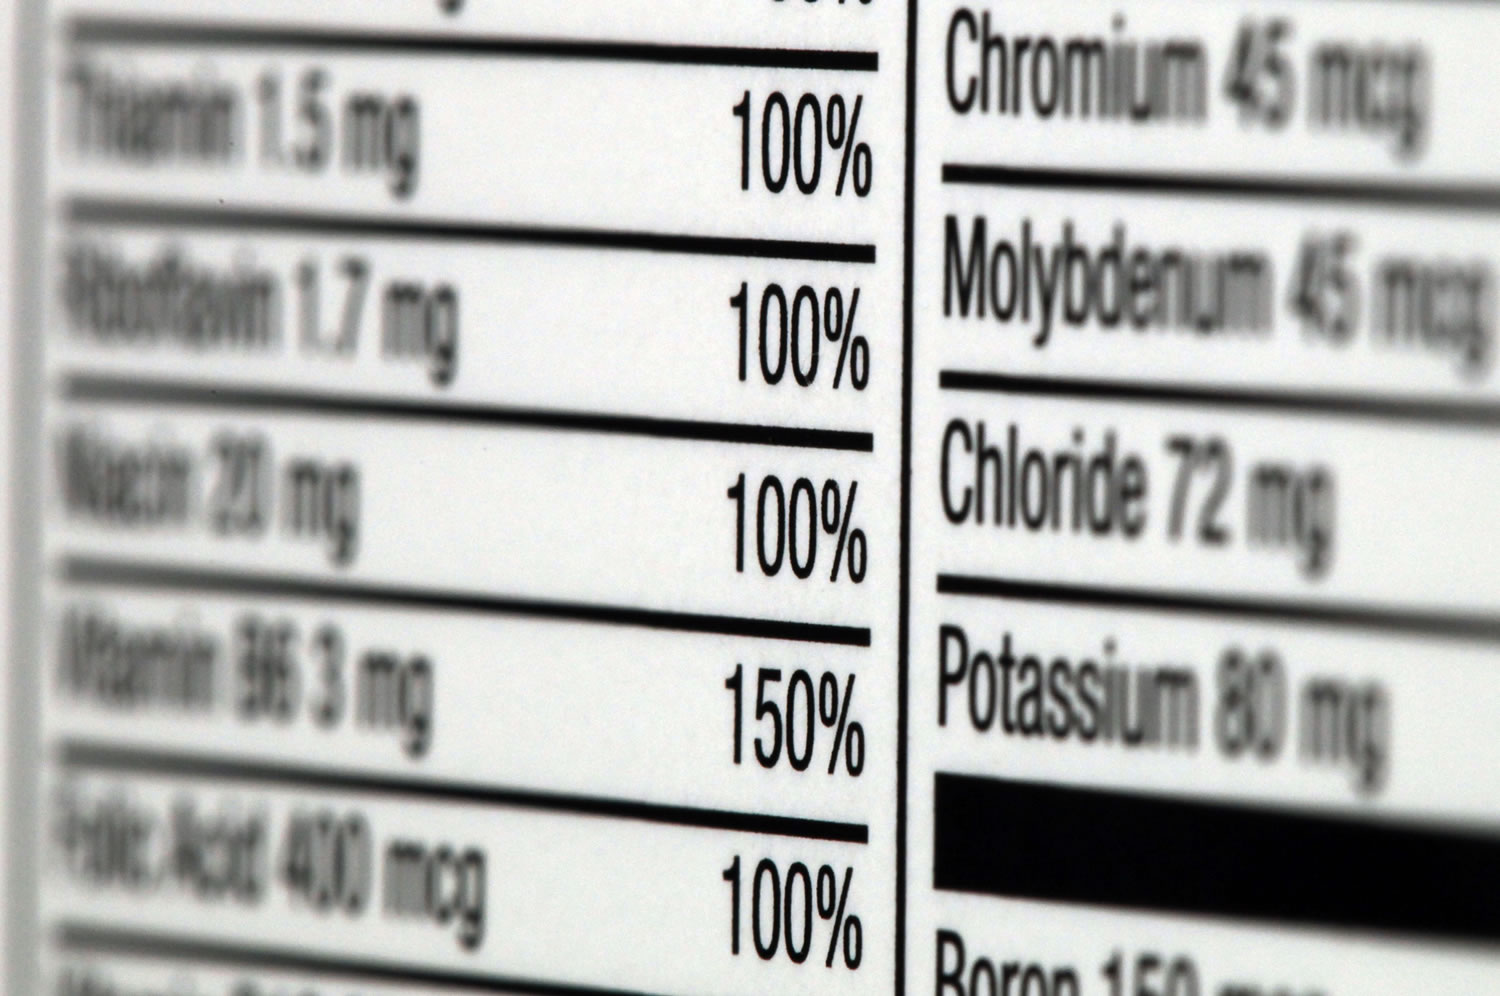 The nutritional label of a box of multivitamins.